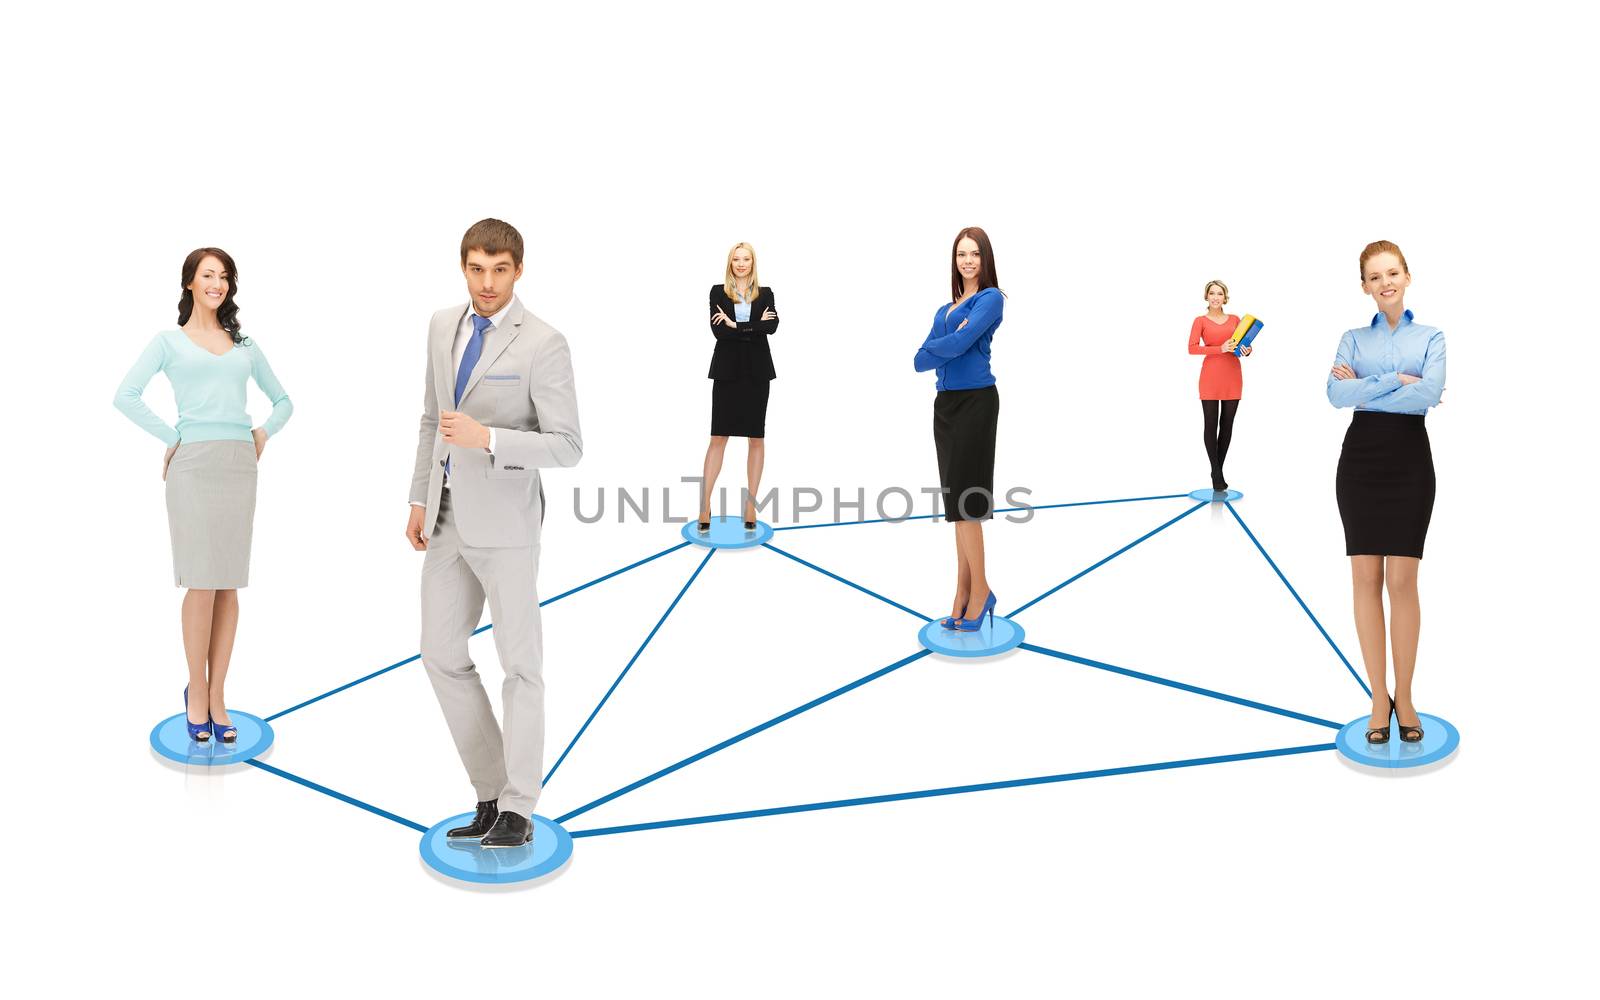 business and networking concept - social or business network